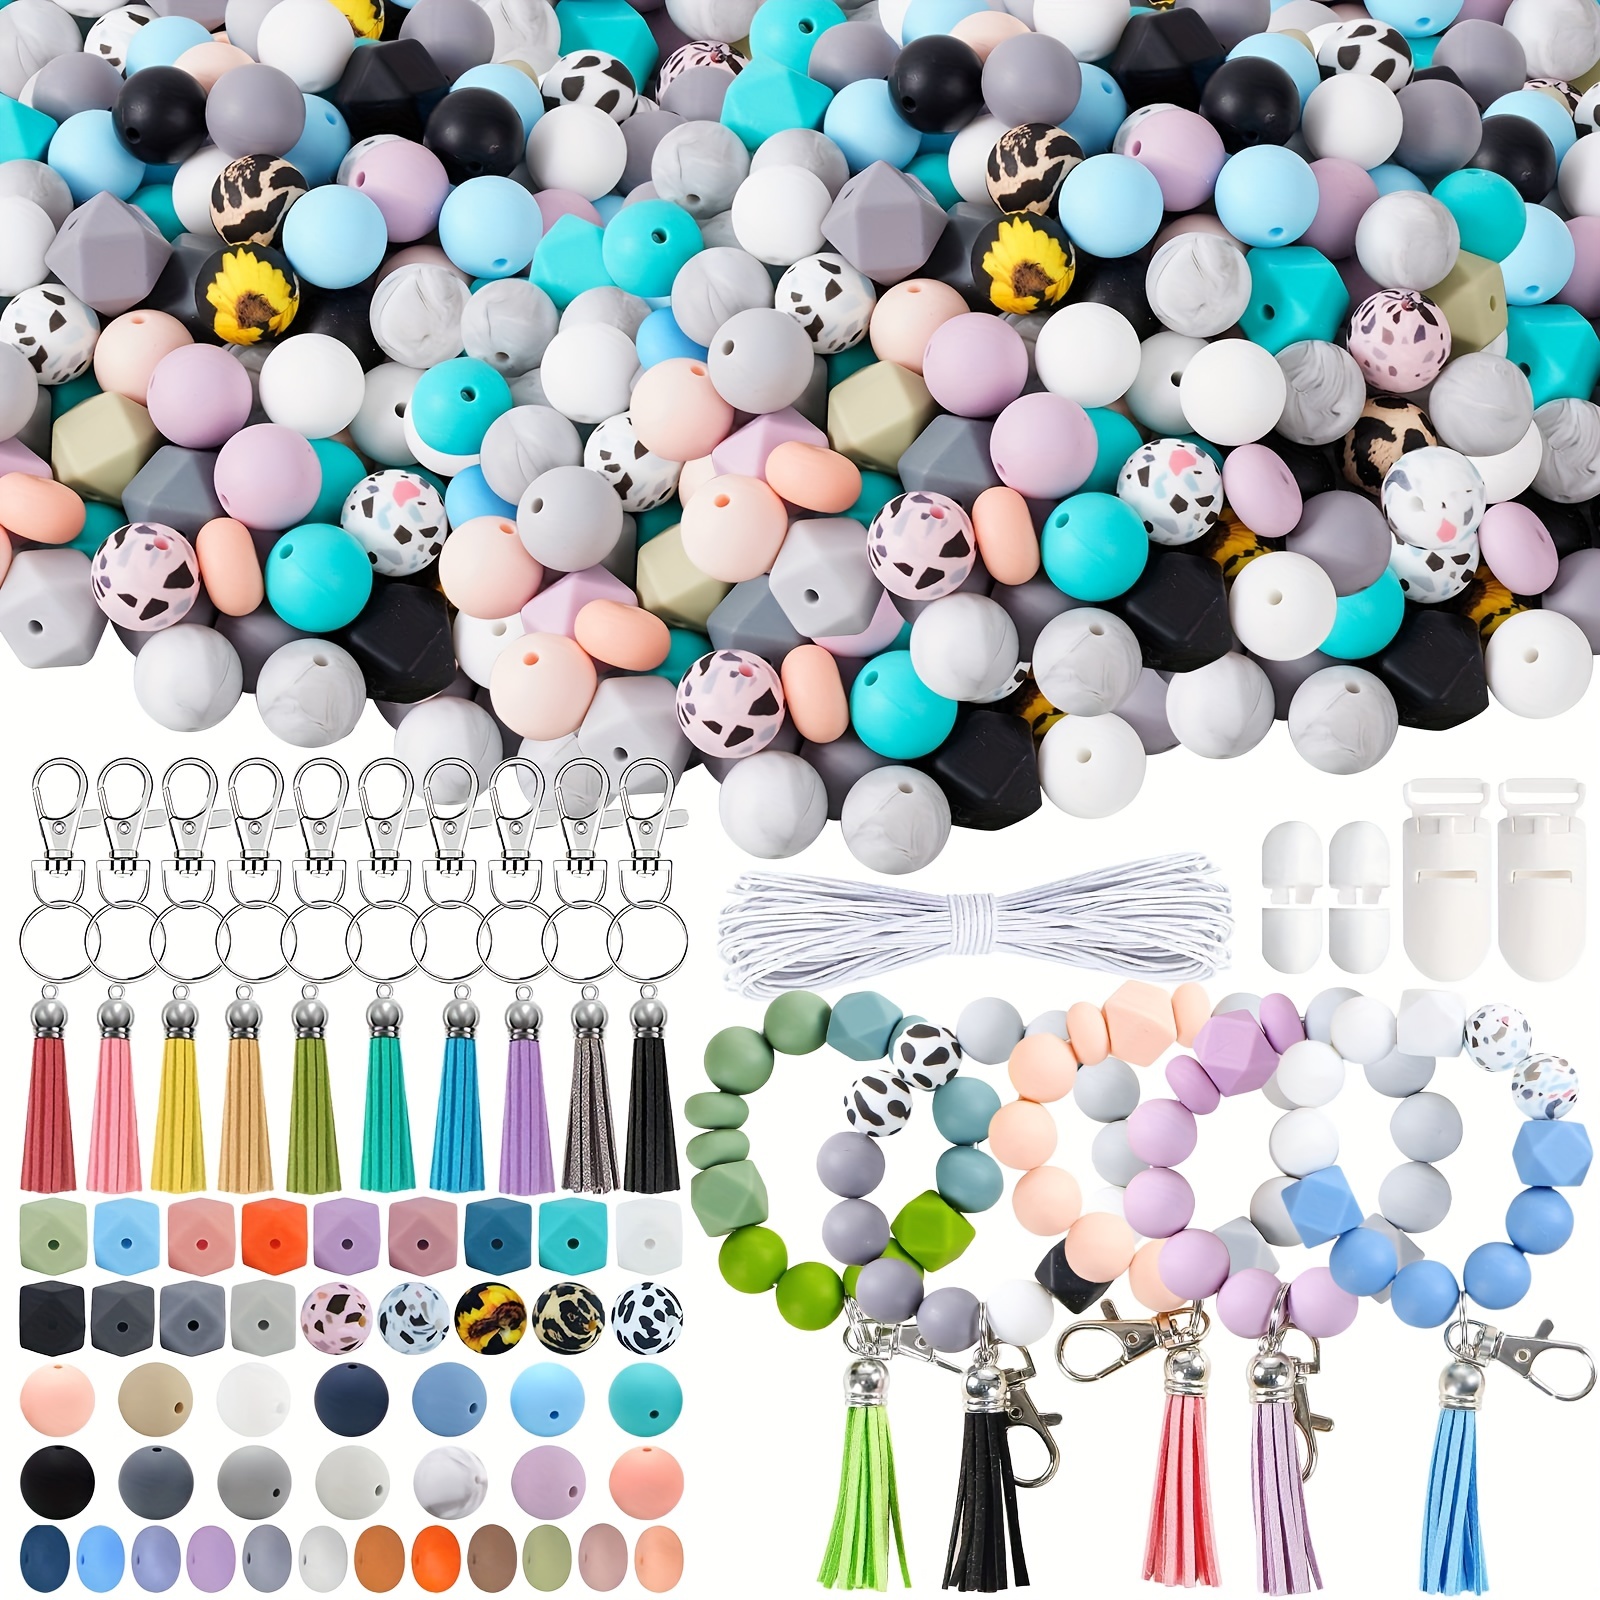 Silicon Craft Accessories, Silicon Jewelry Findings